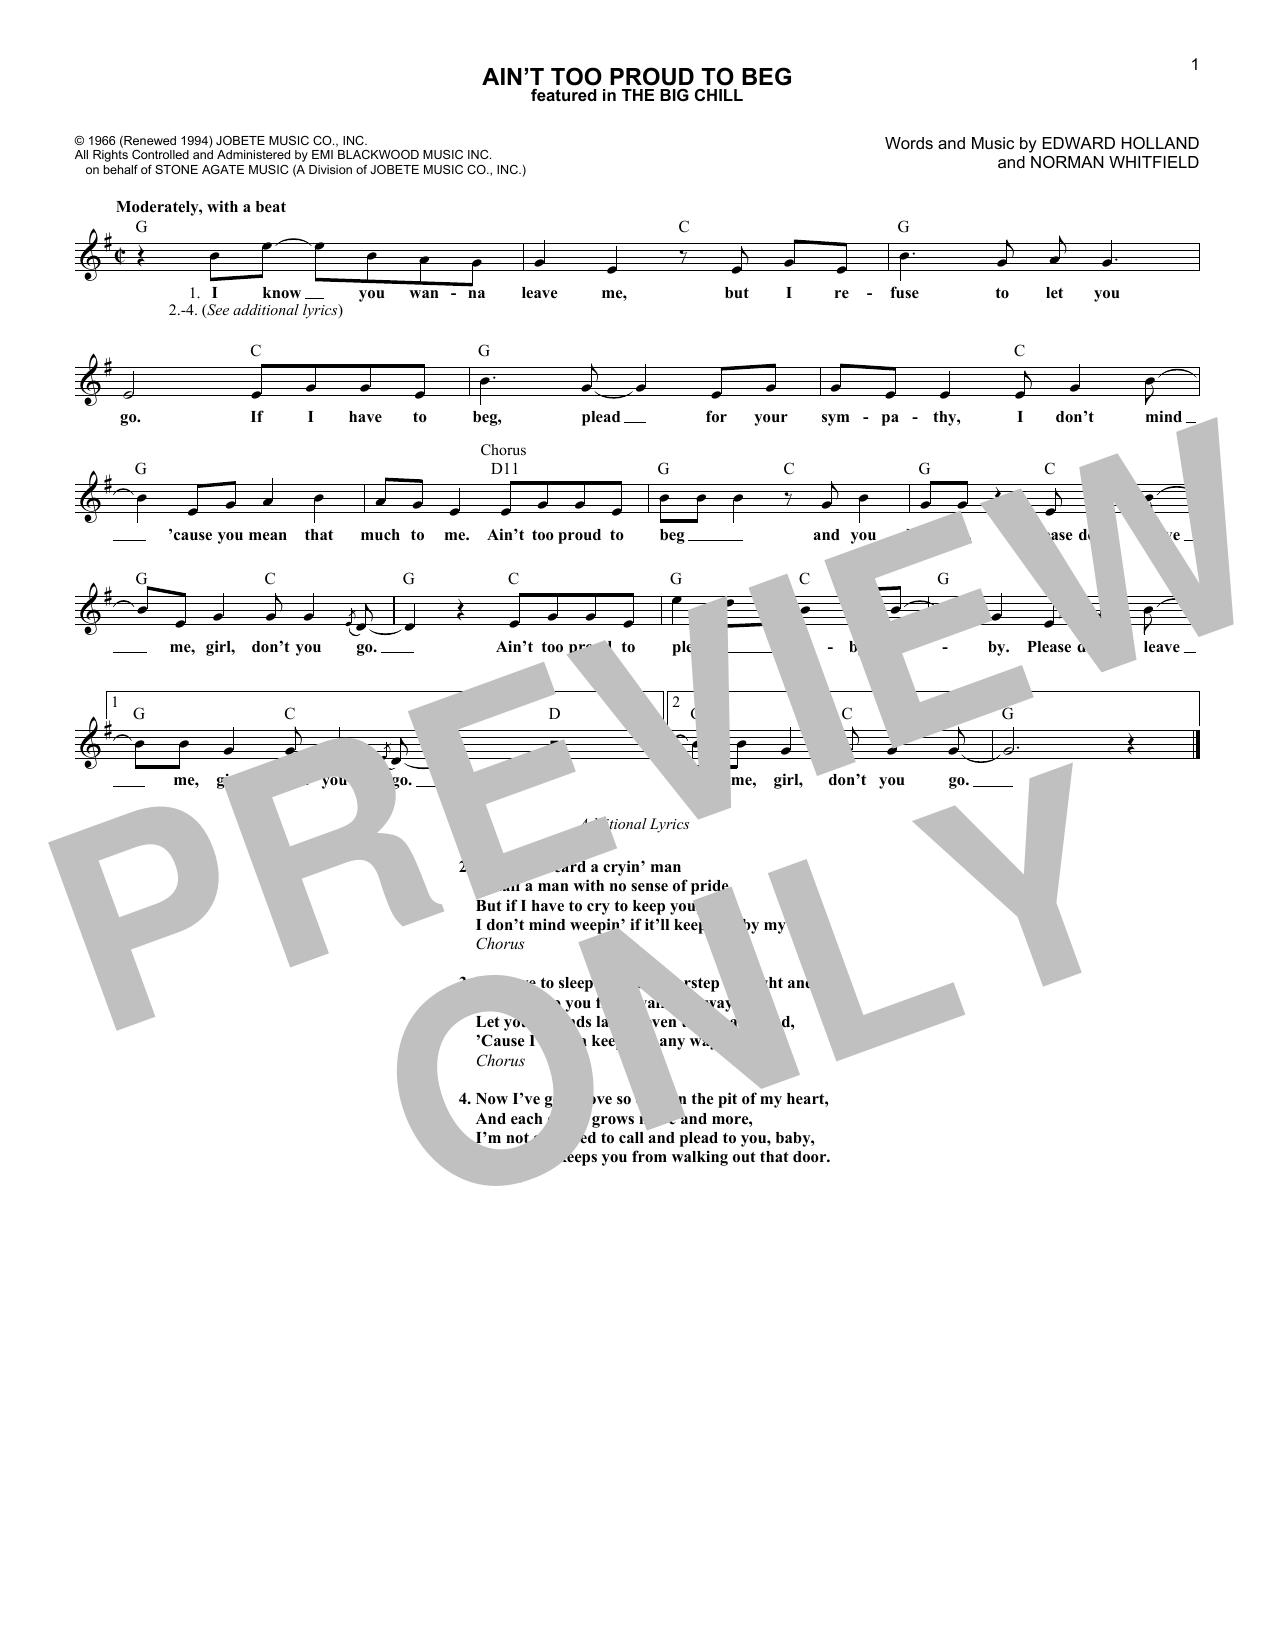 Download The Temptations Ain't Too Proud To Beg Sheet Music